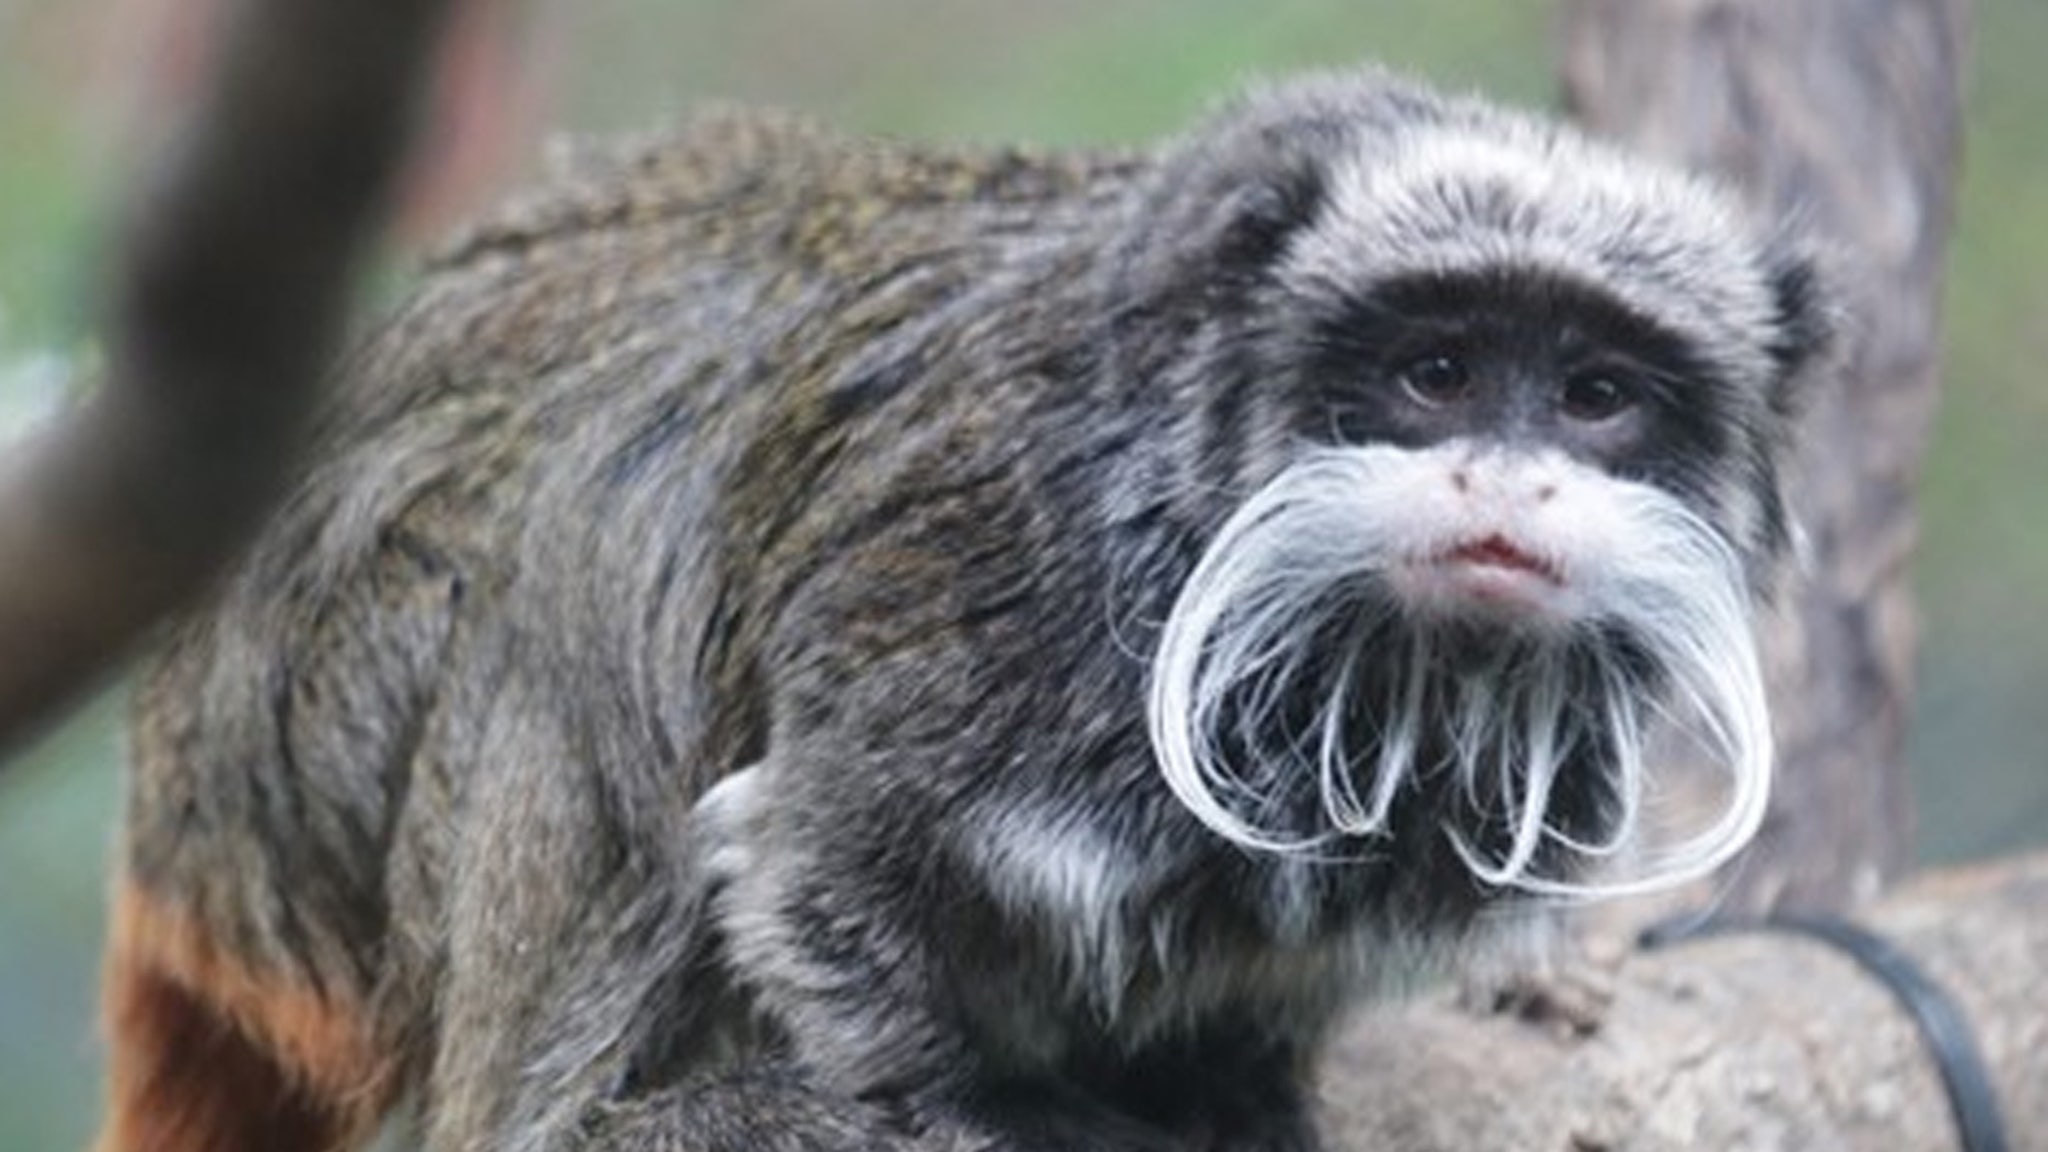 Two Monkeys Allegedly Stolen from Dallas Zoo, Latest Weird Disappearance